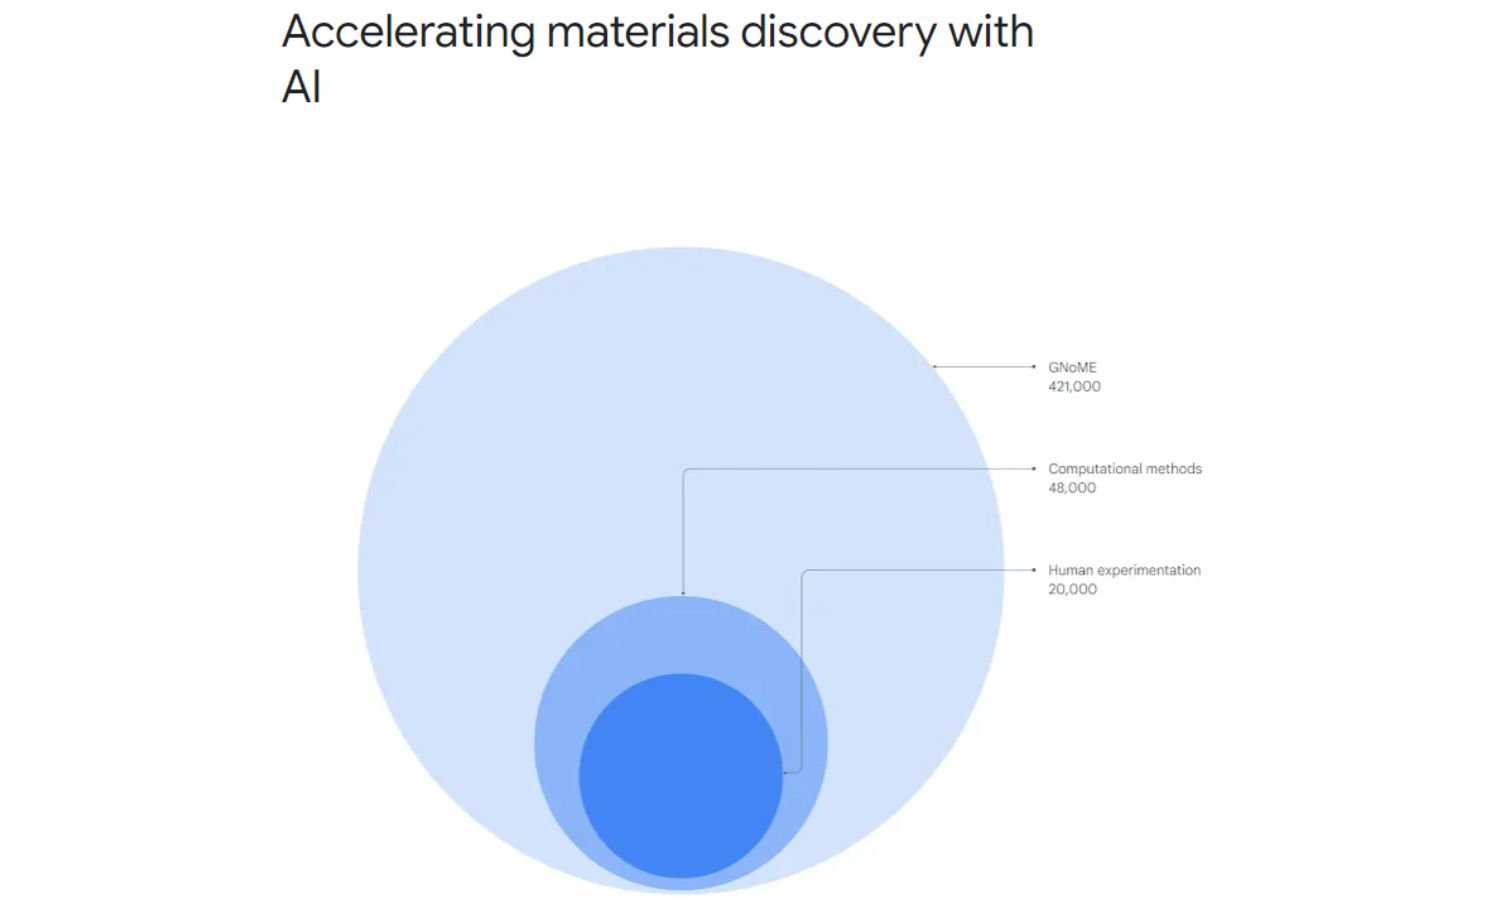 An image showing how many new materials have been discovered by AI